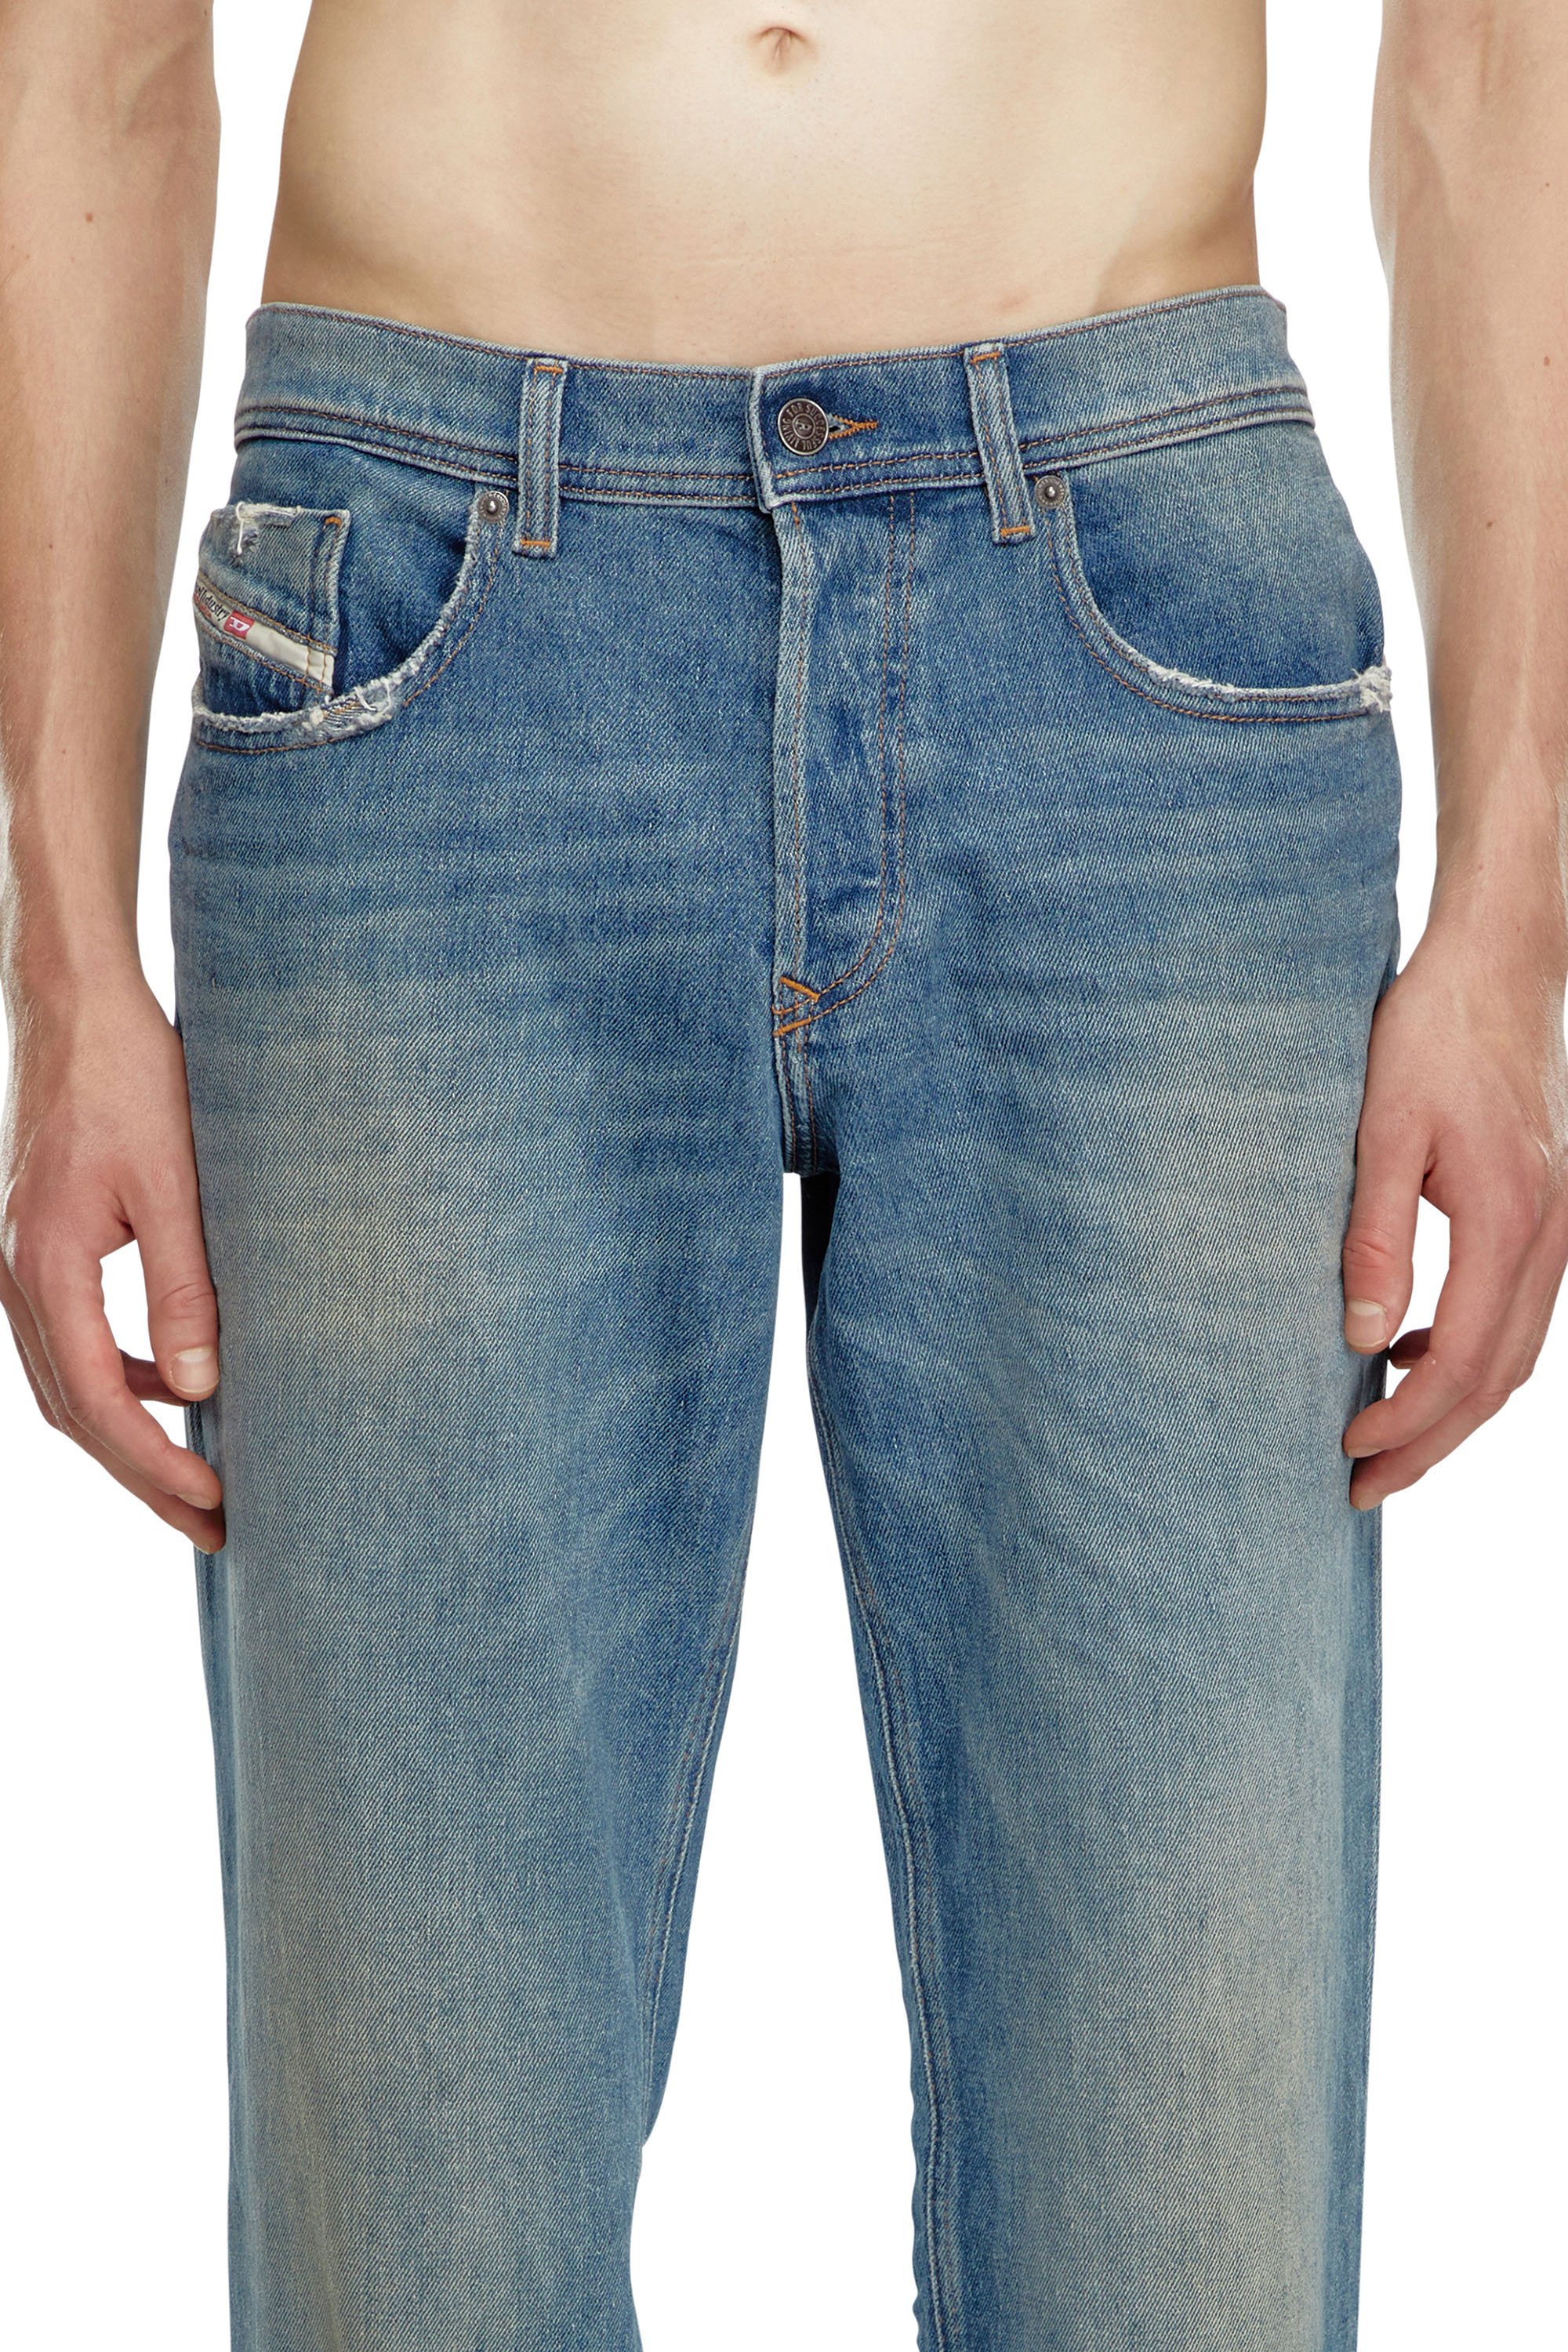 Diesel - Tapered Jeans 2023 D-Finitive 0GRDB, Hombre Tapered Jeans - 2023 D-Finitive in Azul marino - Image 5